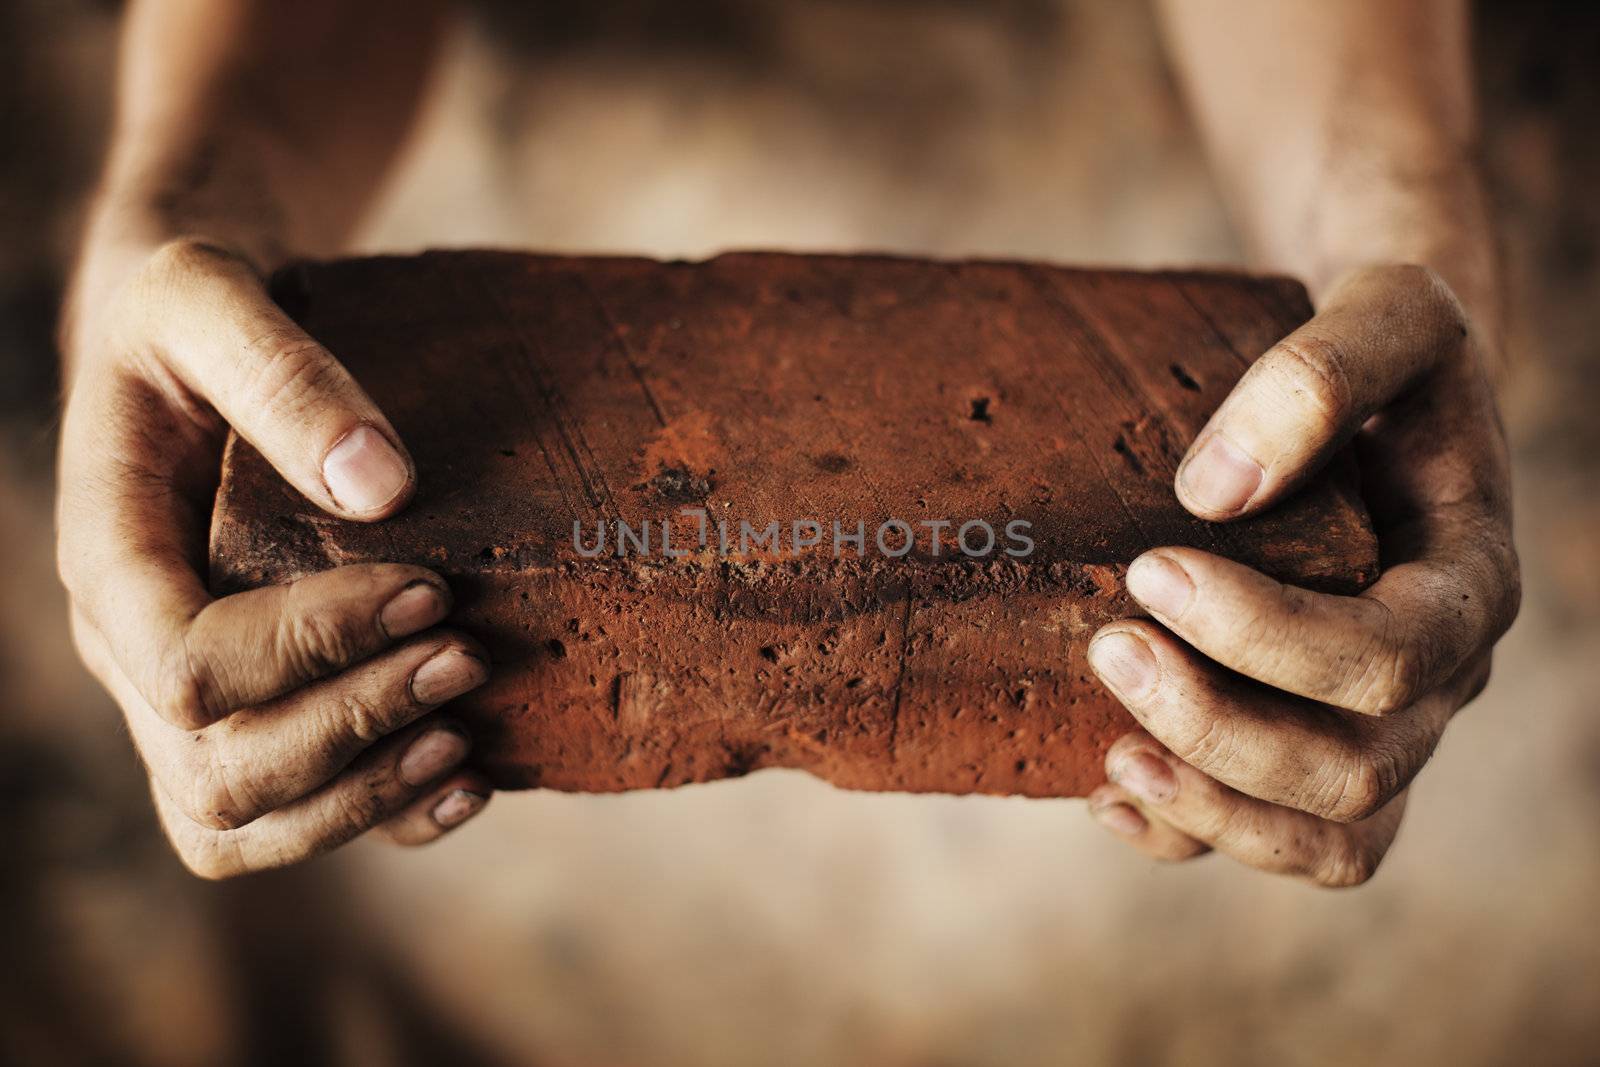 Dirty hands holding an old brick